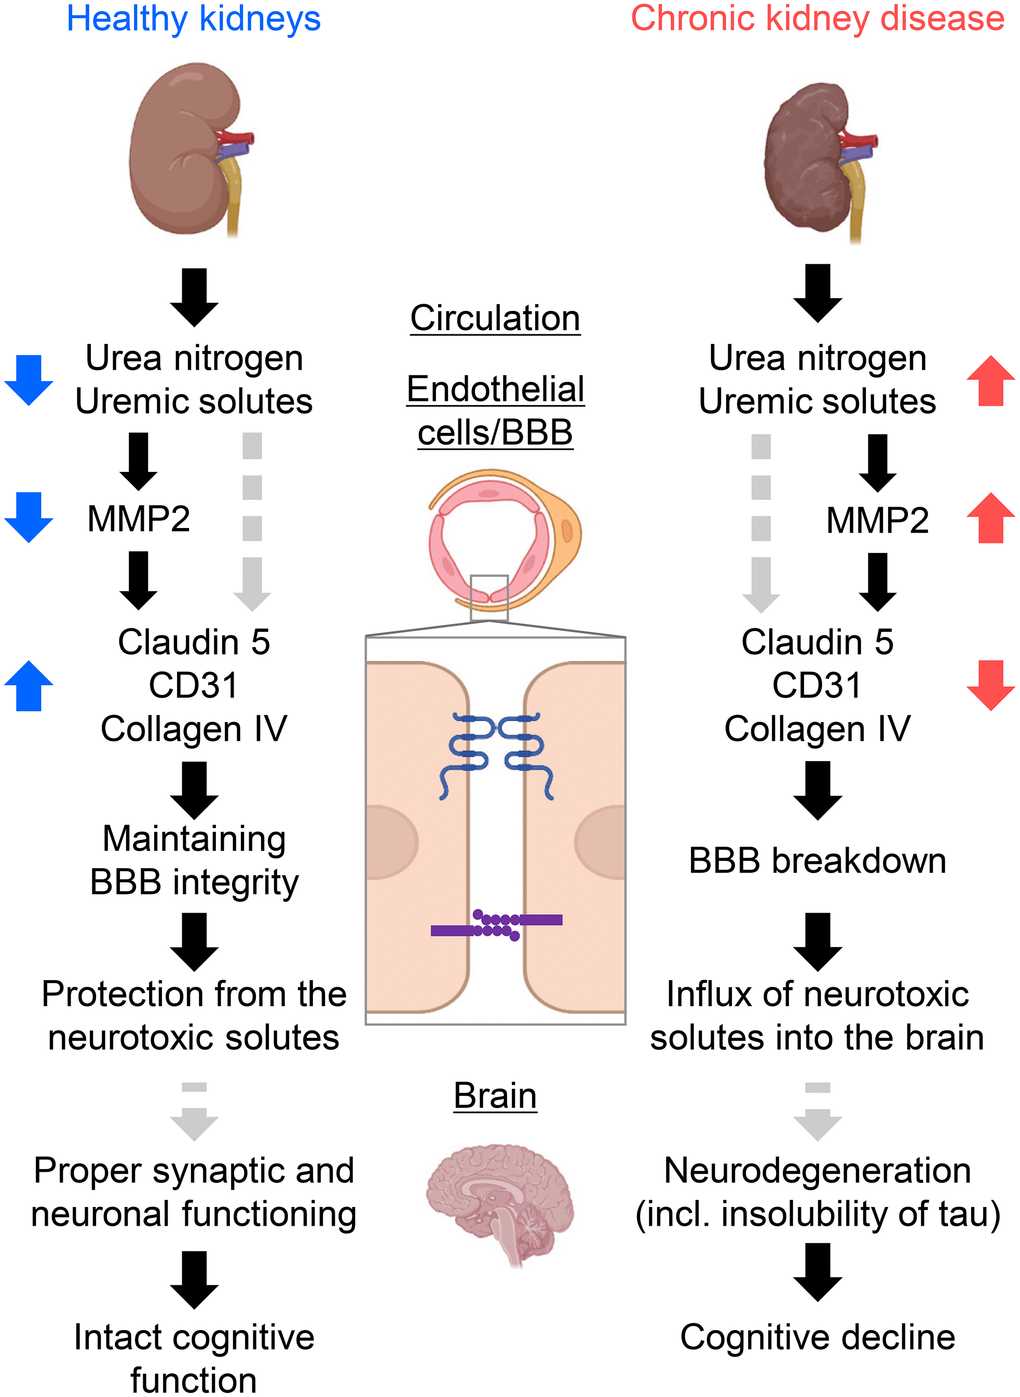 Schematic summary of the study forming the kidney–brain axis. Healthy kidneys sufficiently filtrate and excrete uremic solutes and toxins into urine. Thus, expressions of tight-junction proteins (TJPs) and adherens-junction proteins were sustained, offering fine tuning of the blood–brain barrier (BBB) and proper synaptic and neuronal functioning. Subsequently, the influx of neurotoxic solutes due to BBB opening causes neurodegeneration. The accumulation of insoluble tau or RNA-binding proteins similar to Alzheimer’s disease might result in cognitive decline in CKD. CKD, chronic kidney disease; MMP2, matrix metalloproteinase-2. Created with BioRender.com.